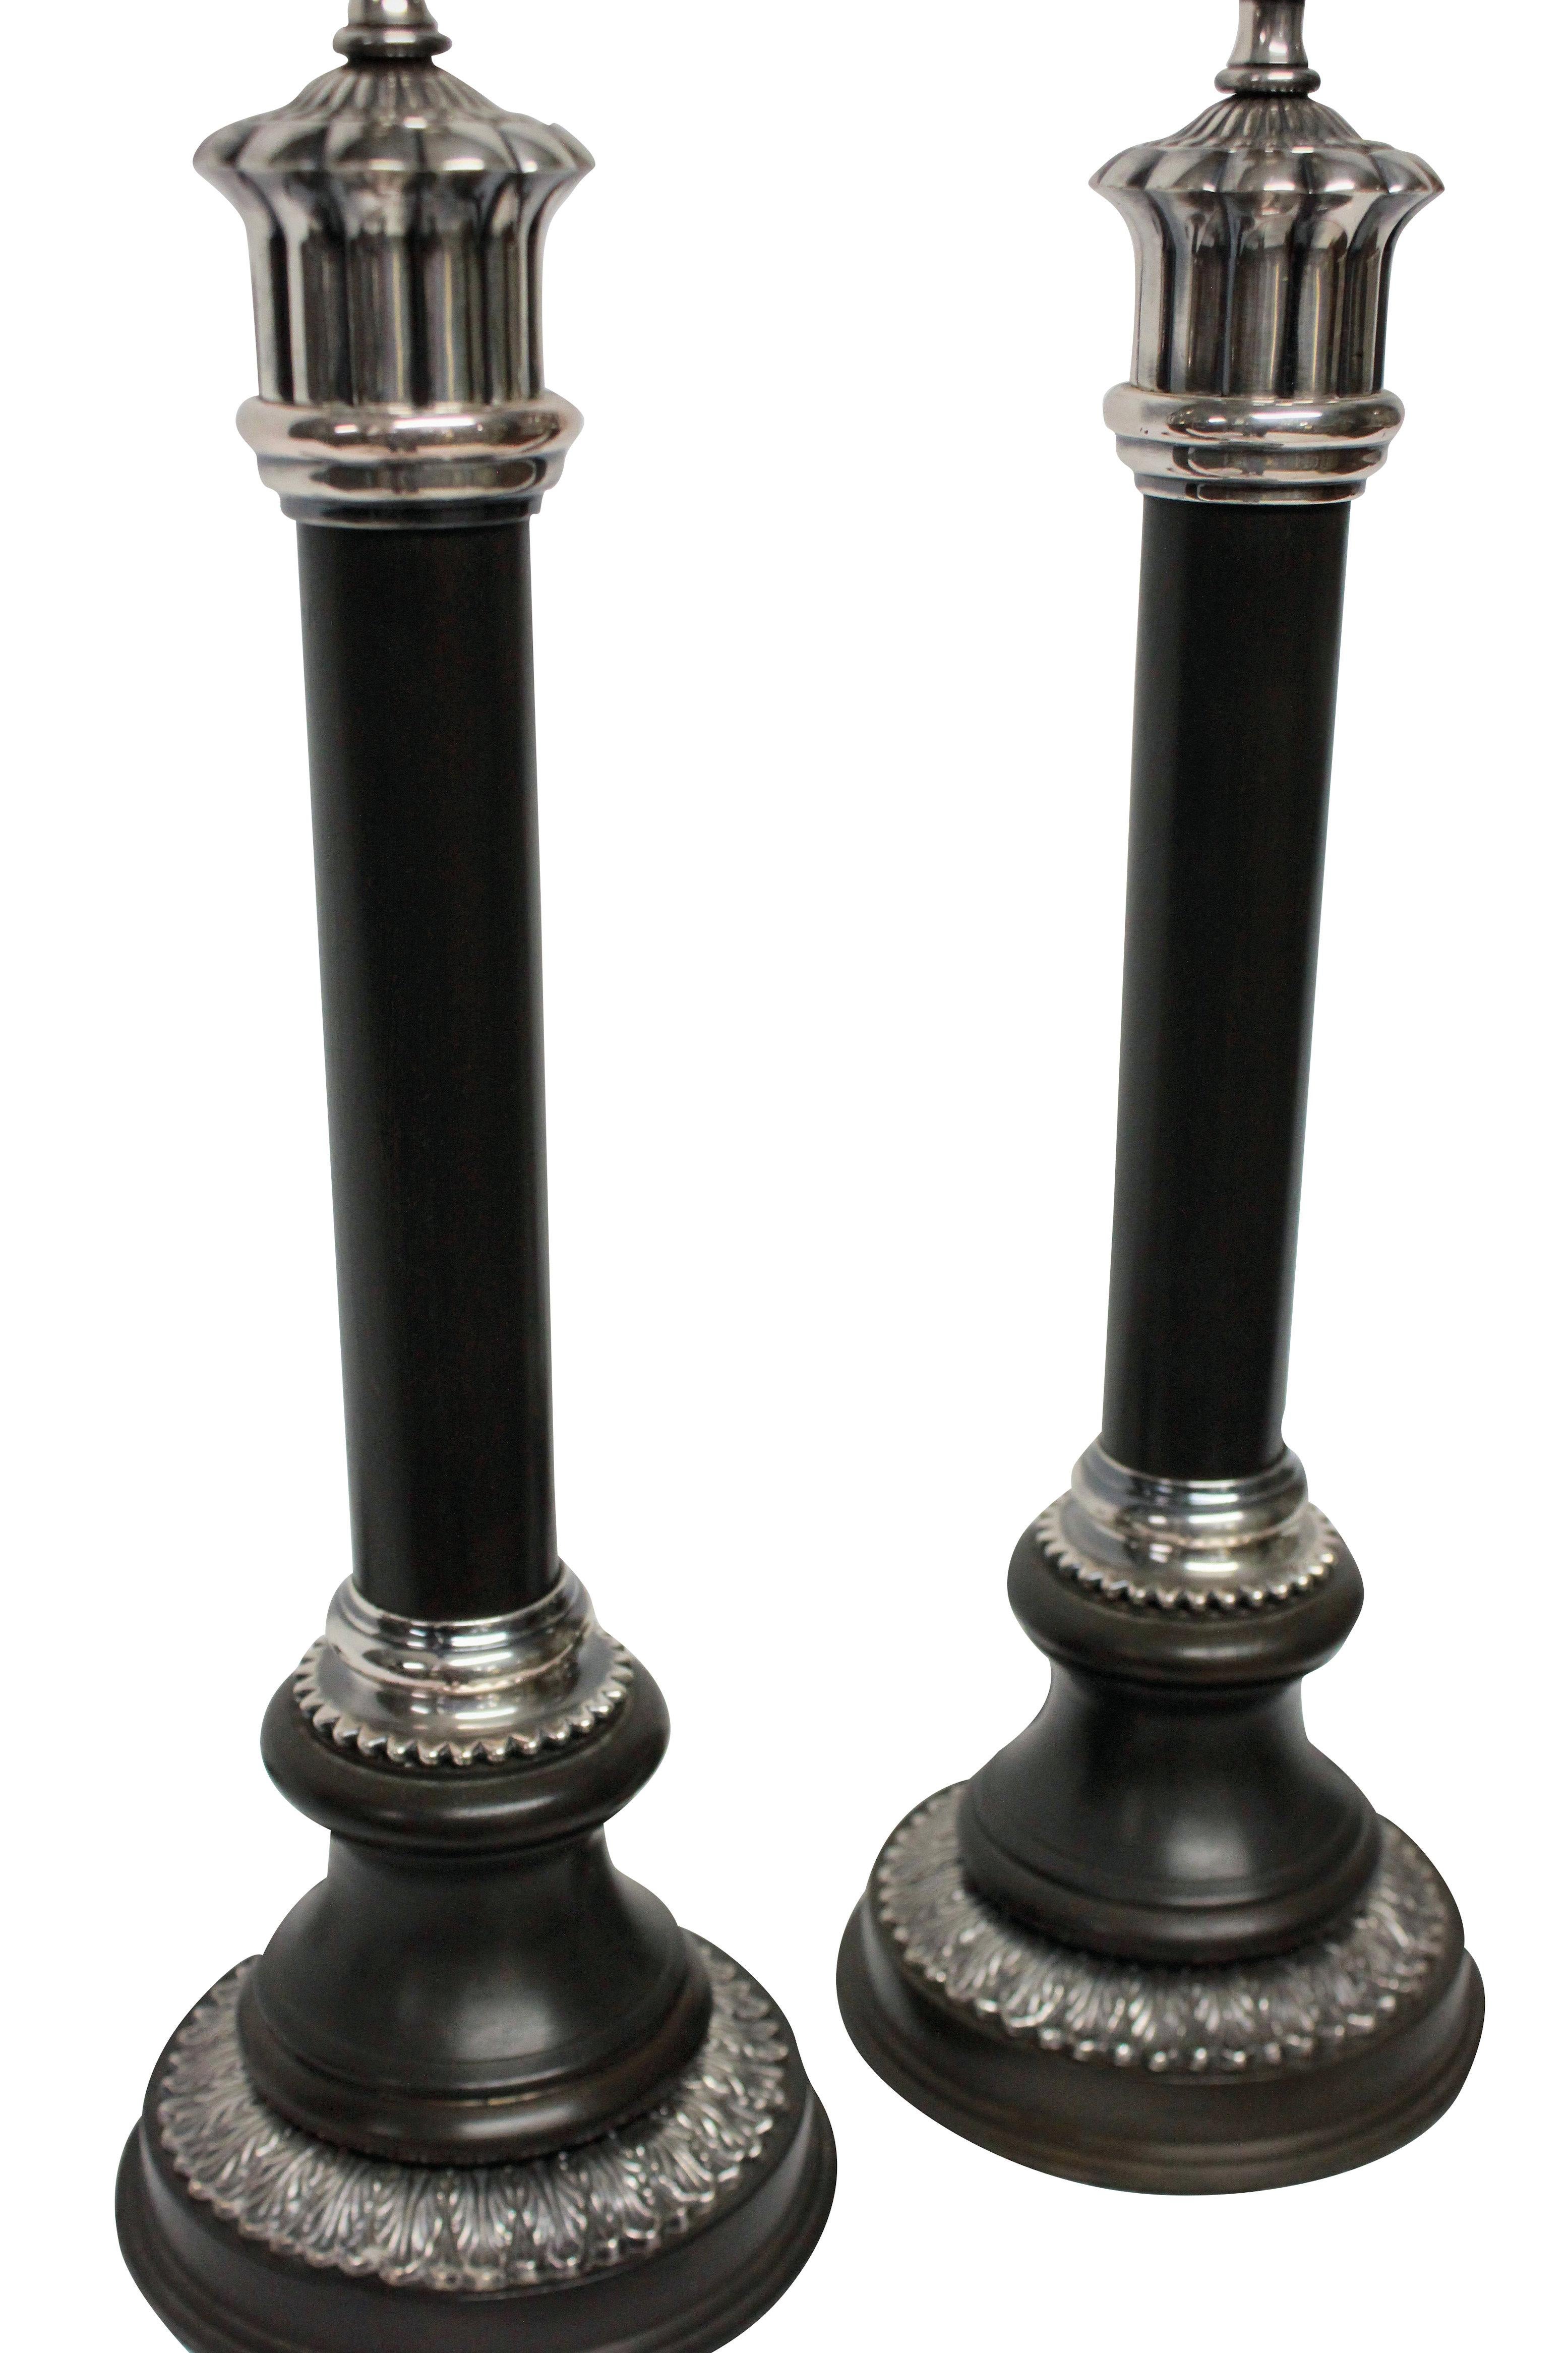 A pair of English bronzed and silver plated neoclassical column table lamps.